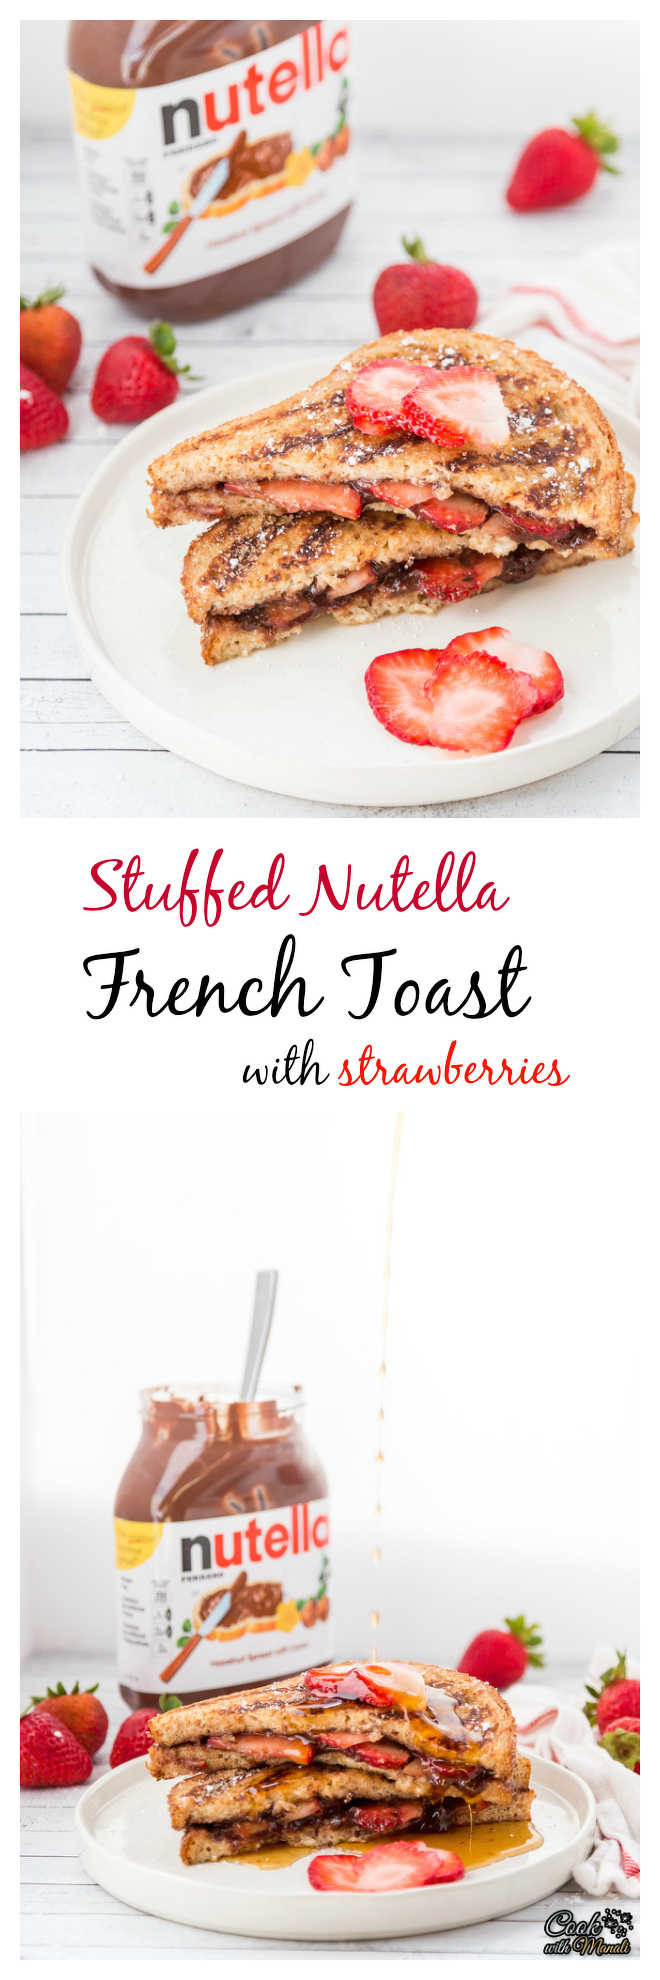 Nutella French Toast Collage-nocwm